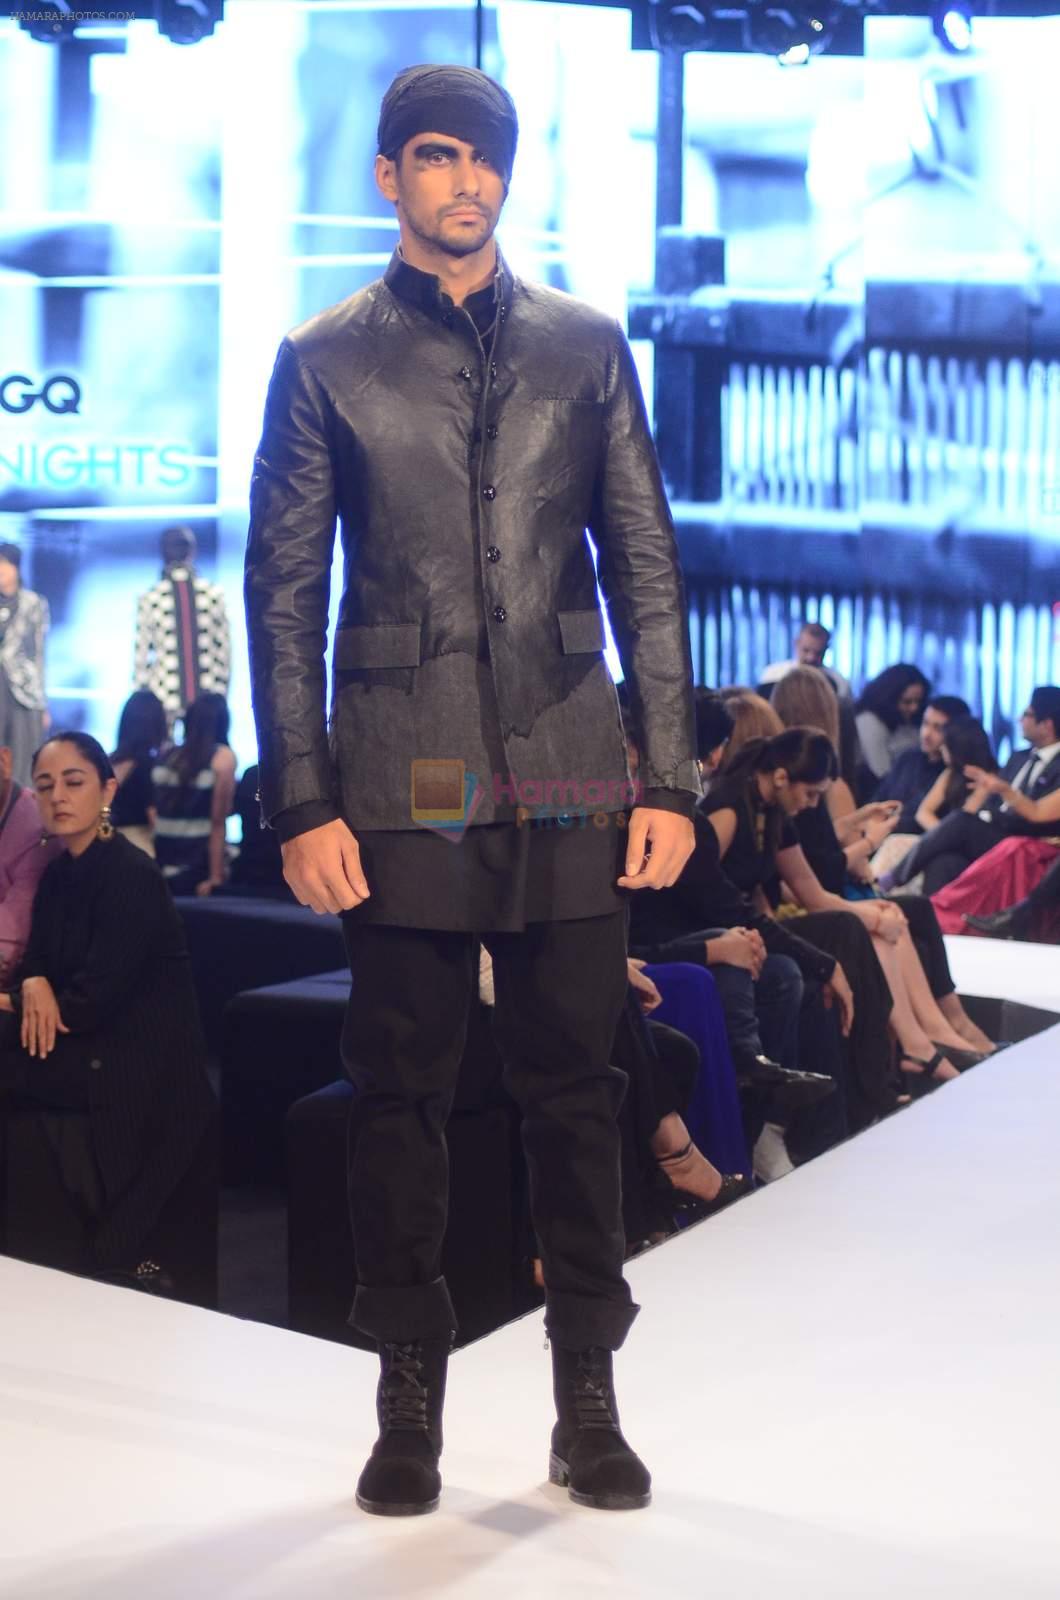 on day 2 of GQ Fashion Nights on 3rd Dec 2015